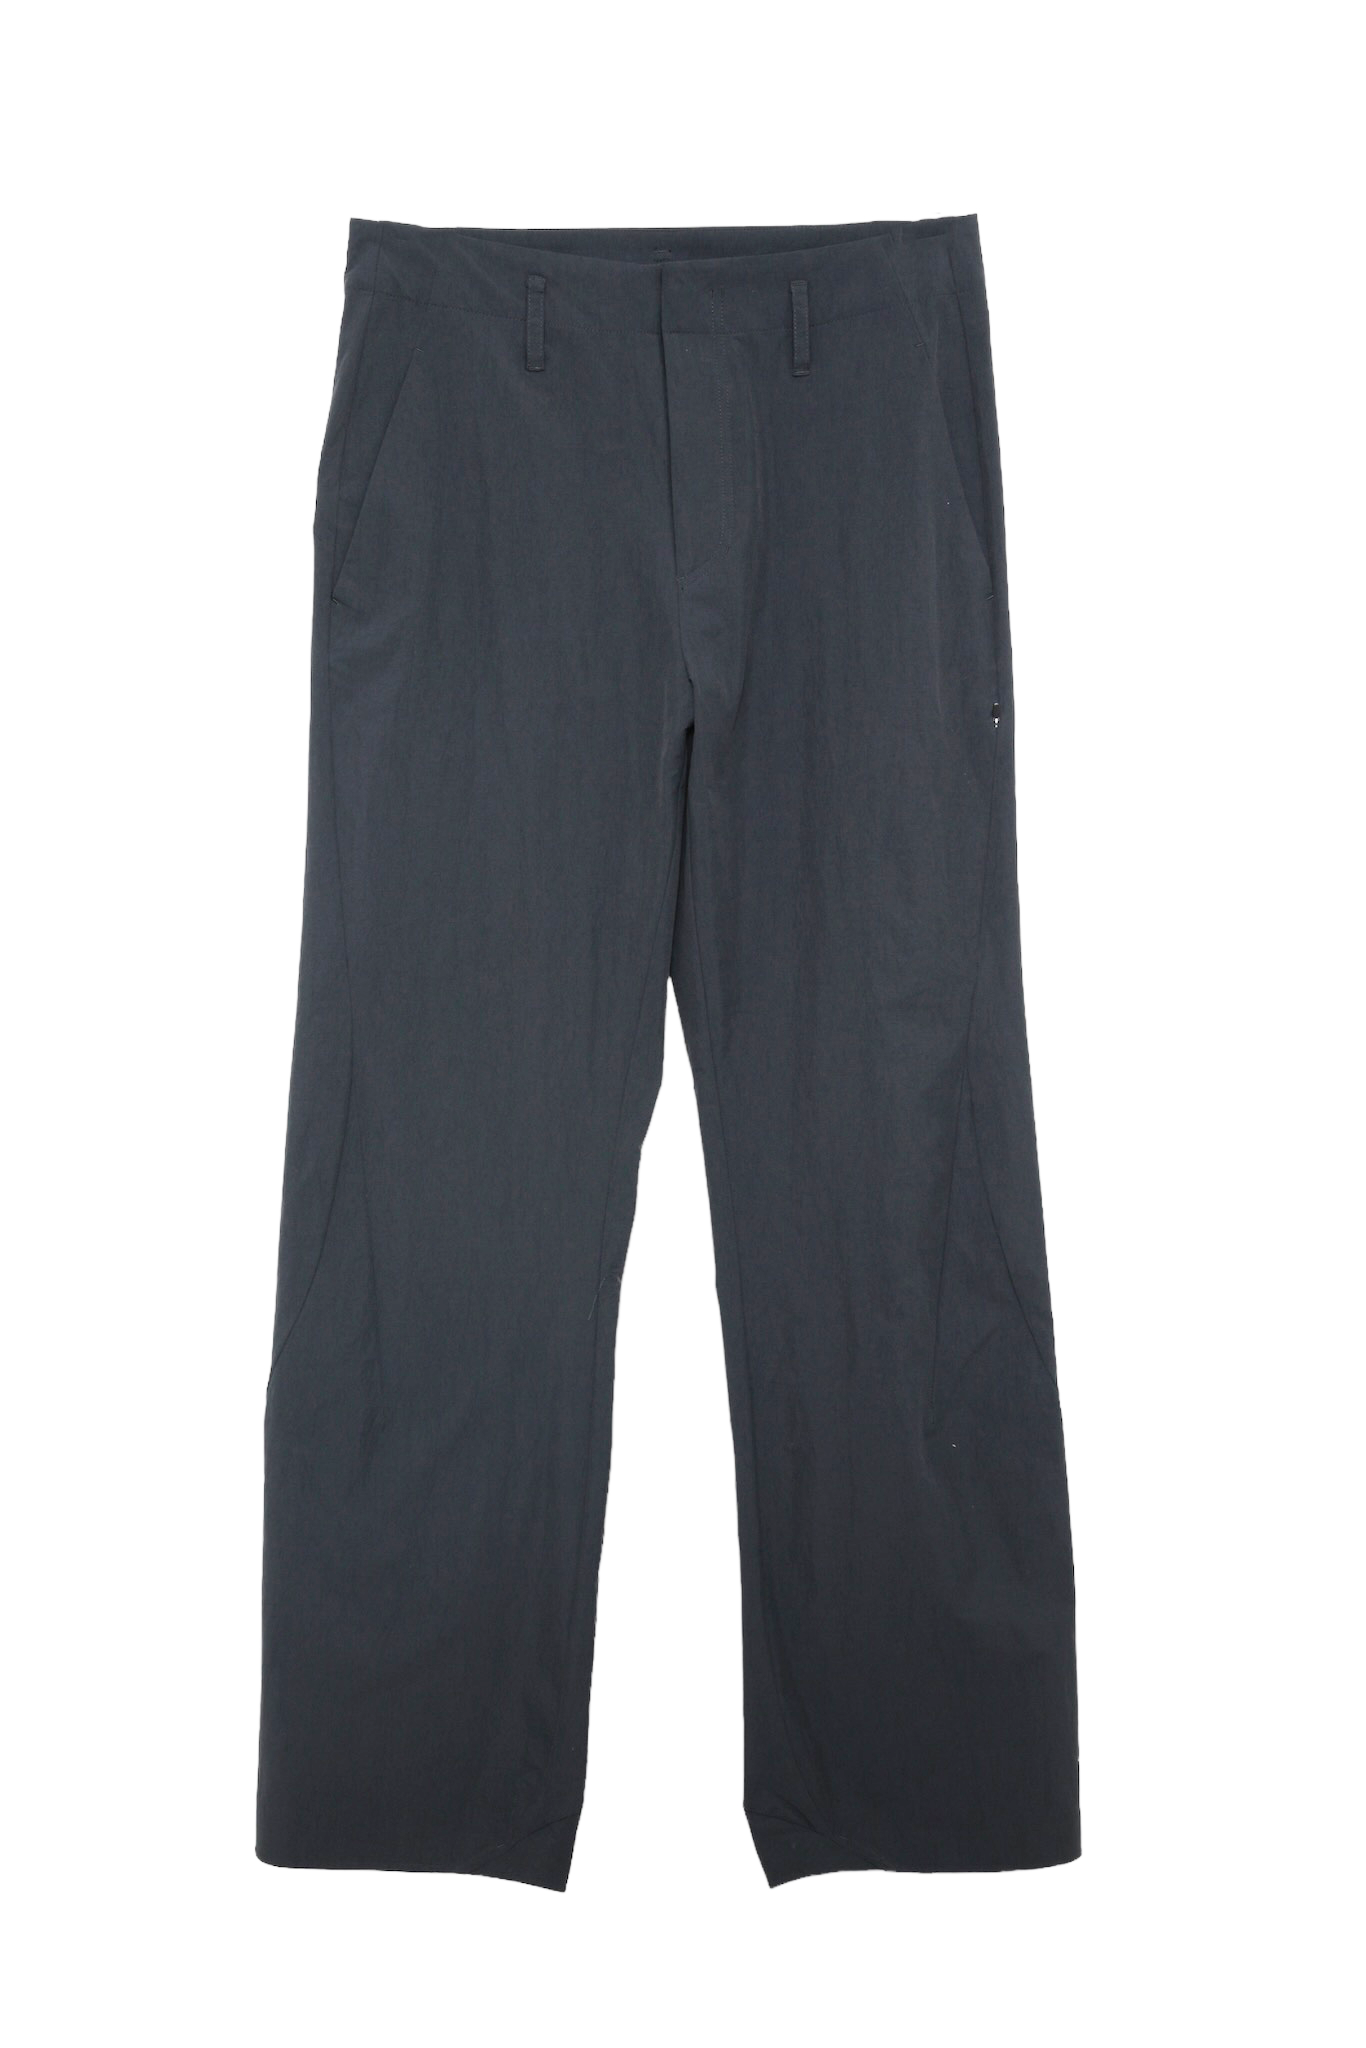 PAF 6.0 TROUSERS RIGHT